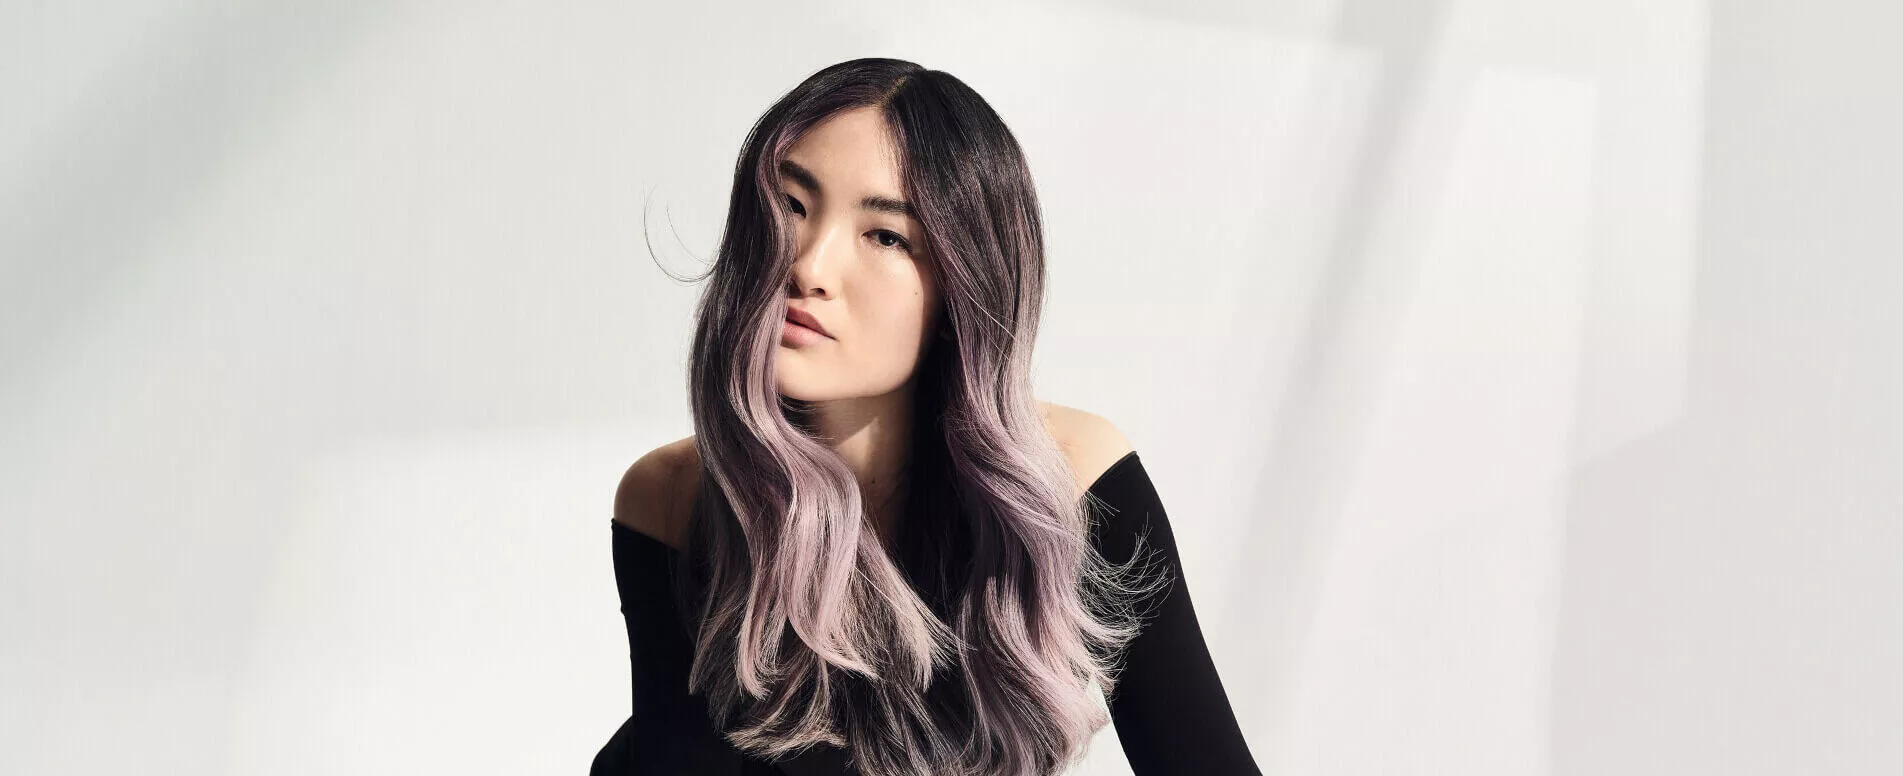 Model with dark lavender hair is dressed in black and leaning to one side